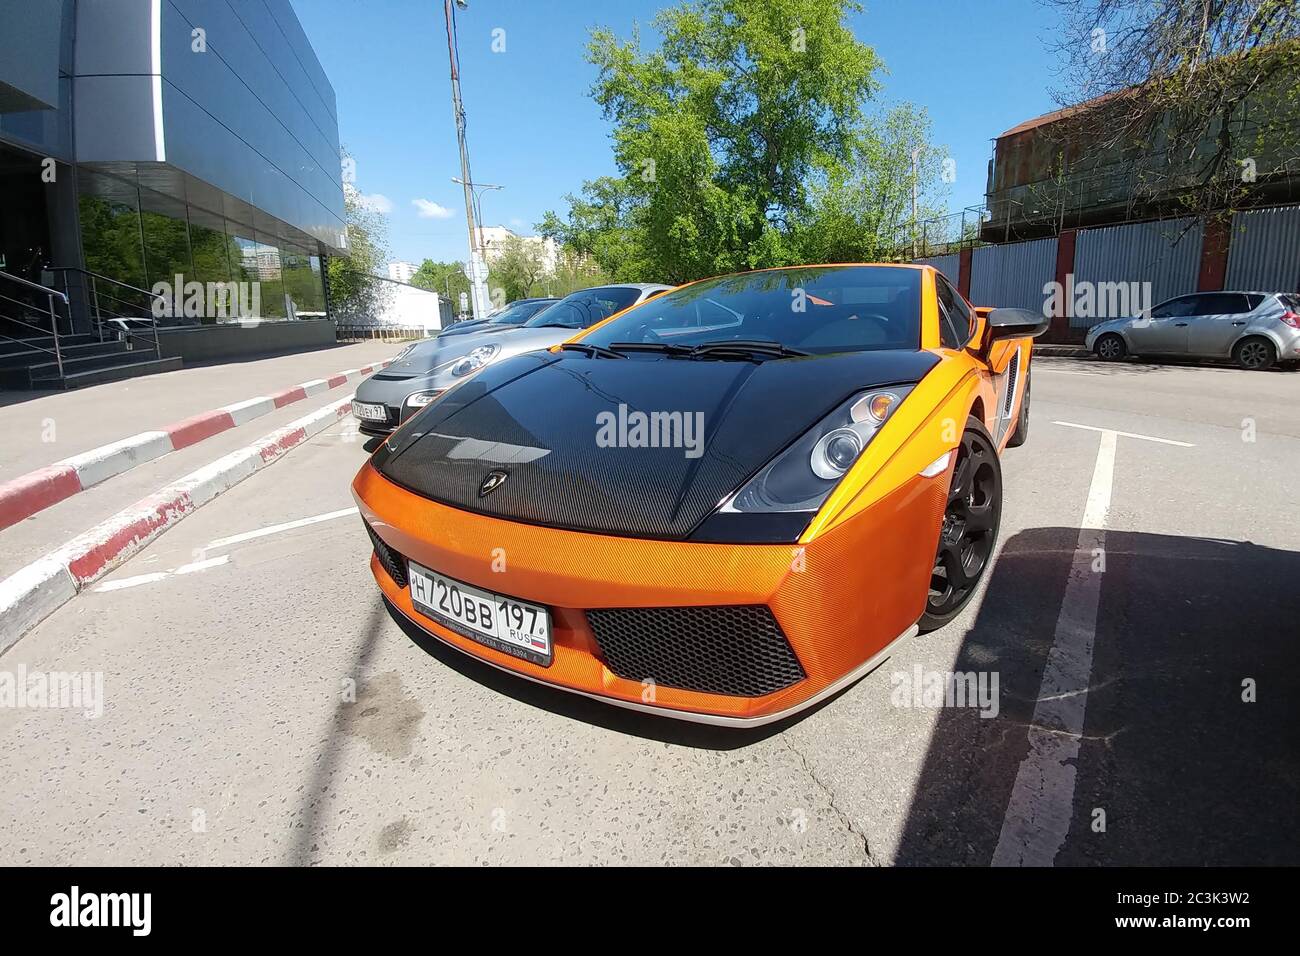 Moscow, Russia - April 14, 2019: bright orange Lamborghini Gallardo with carbon hood and other parts parked on the street Front view Stock Photo